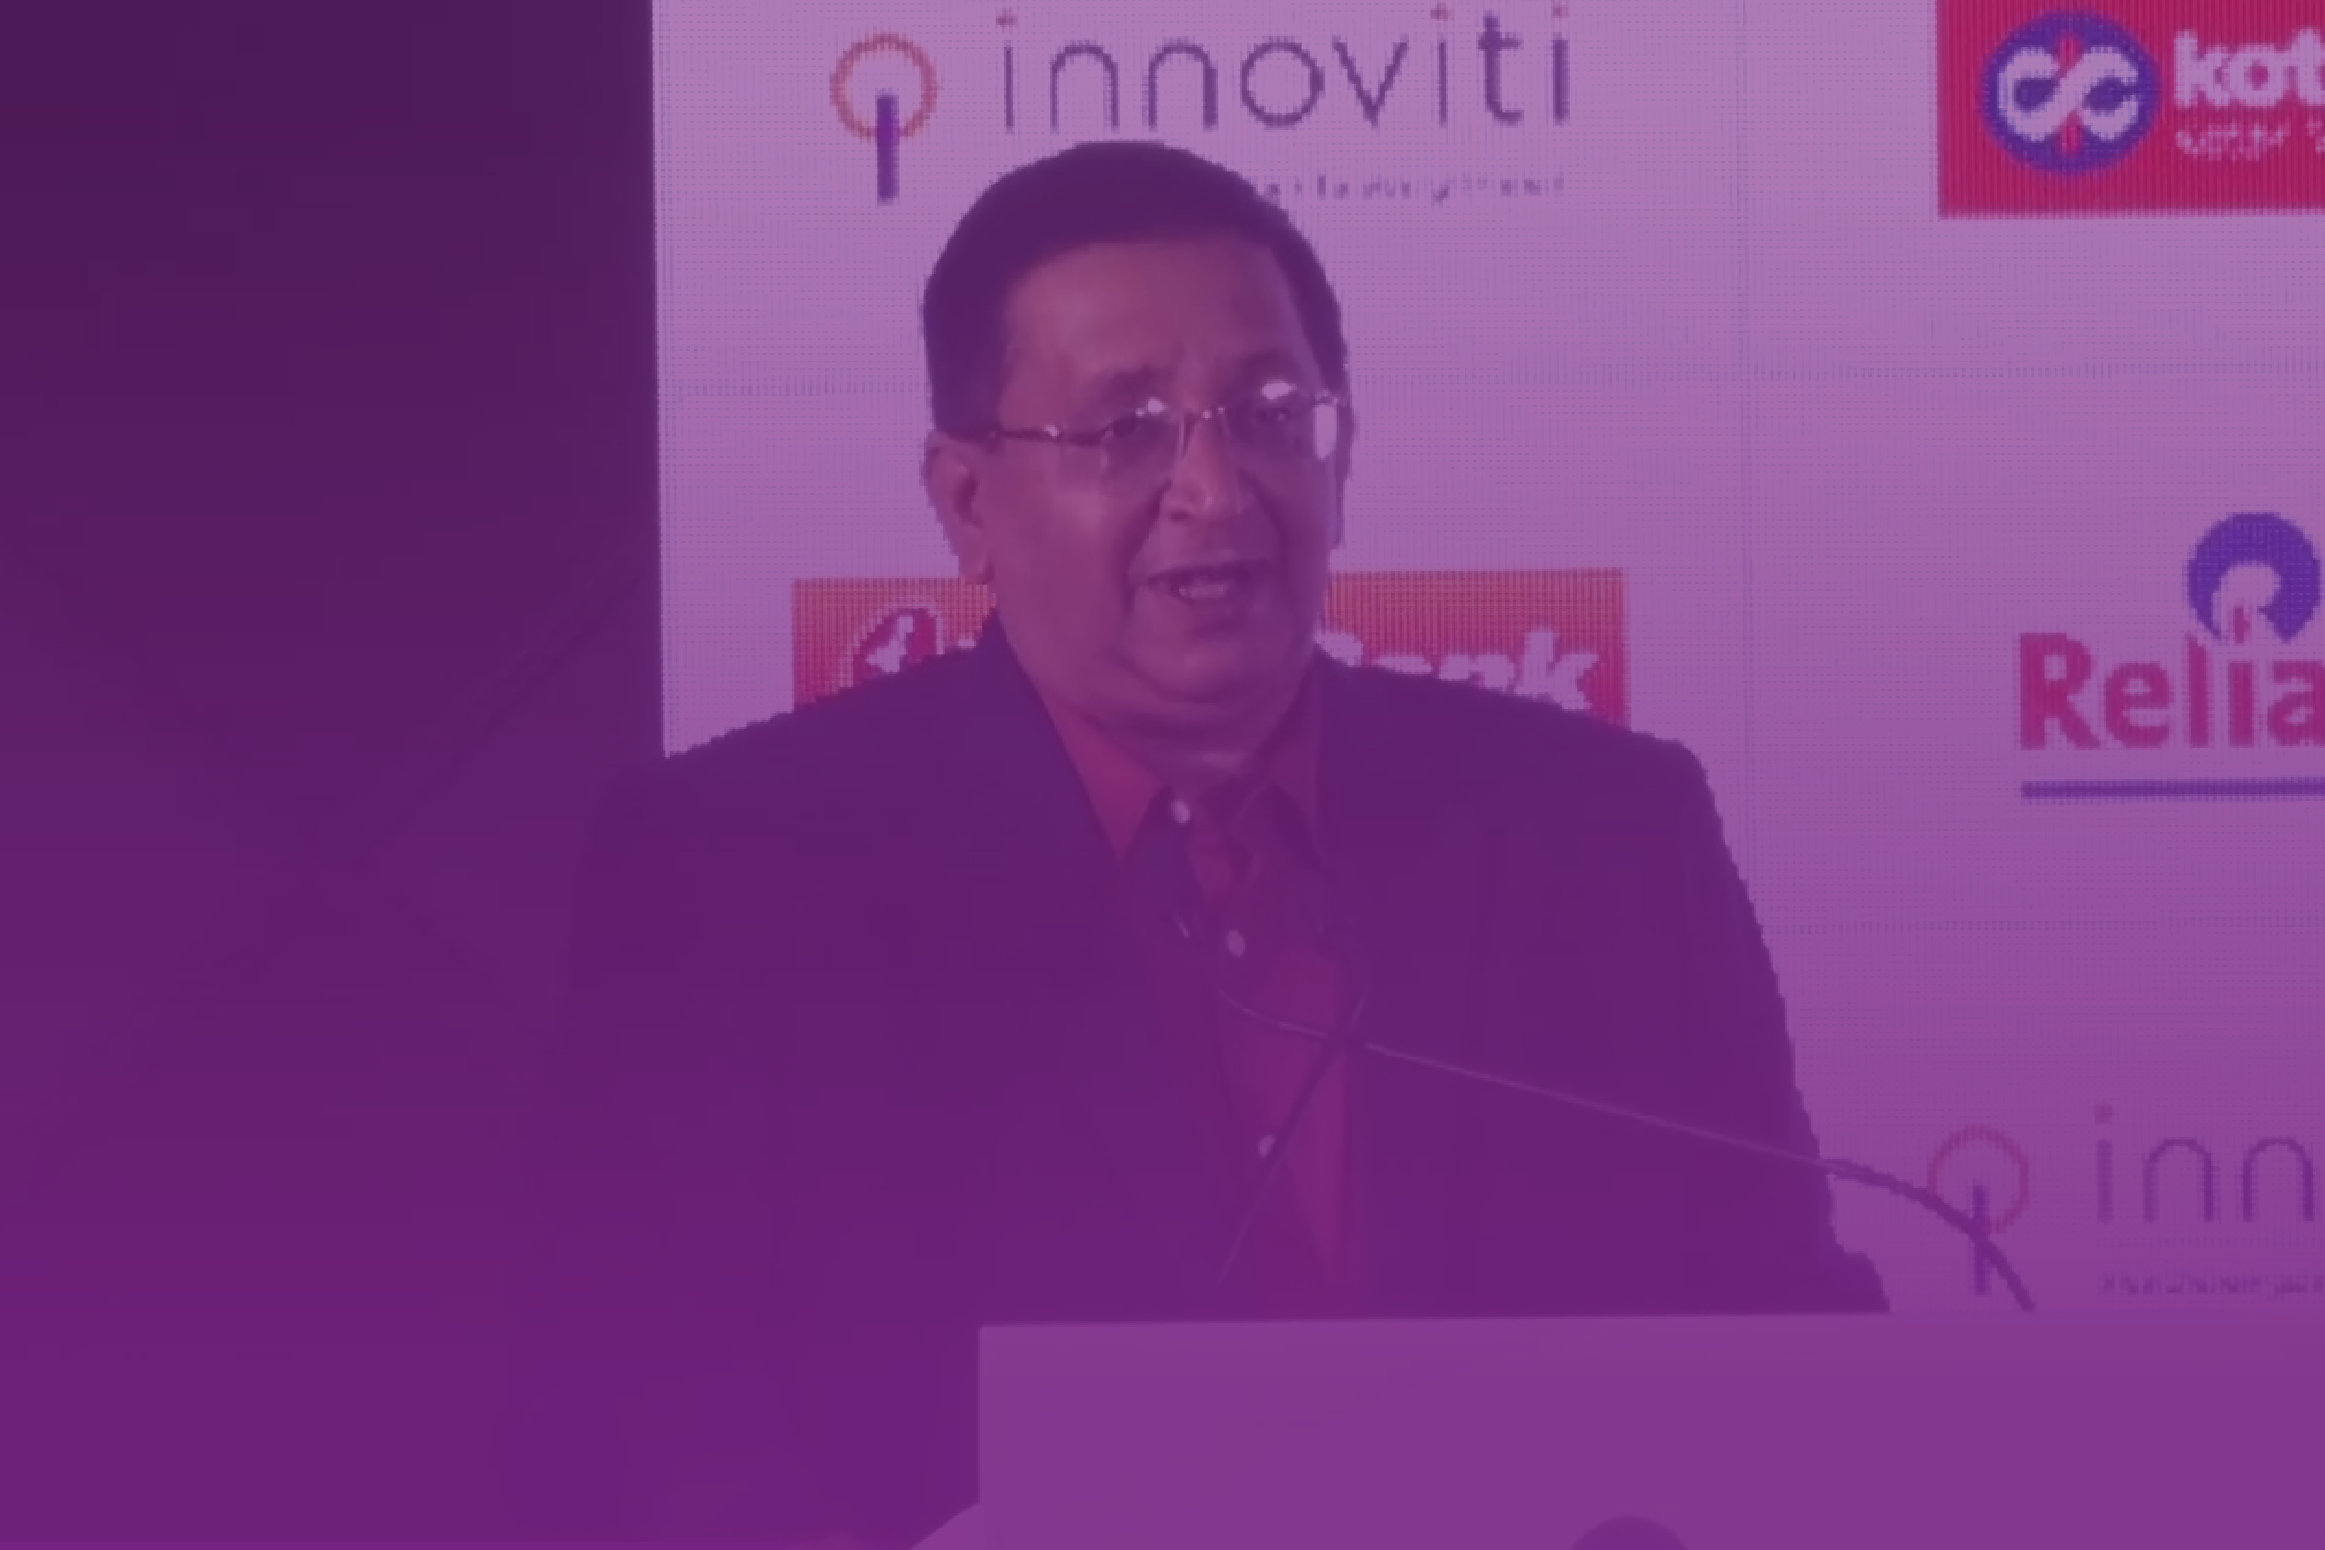 Mr. V. Subramaniam, MD, Reliance Retail on Digital Rupee launch with Innoviti, ICICI and Kotak